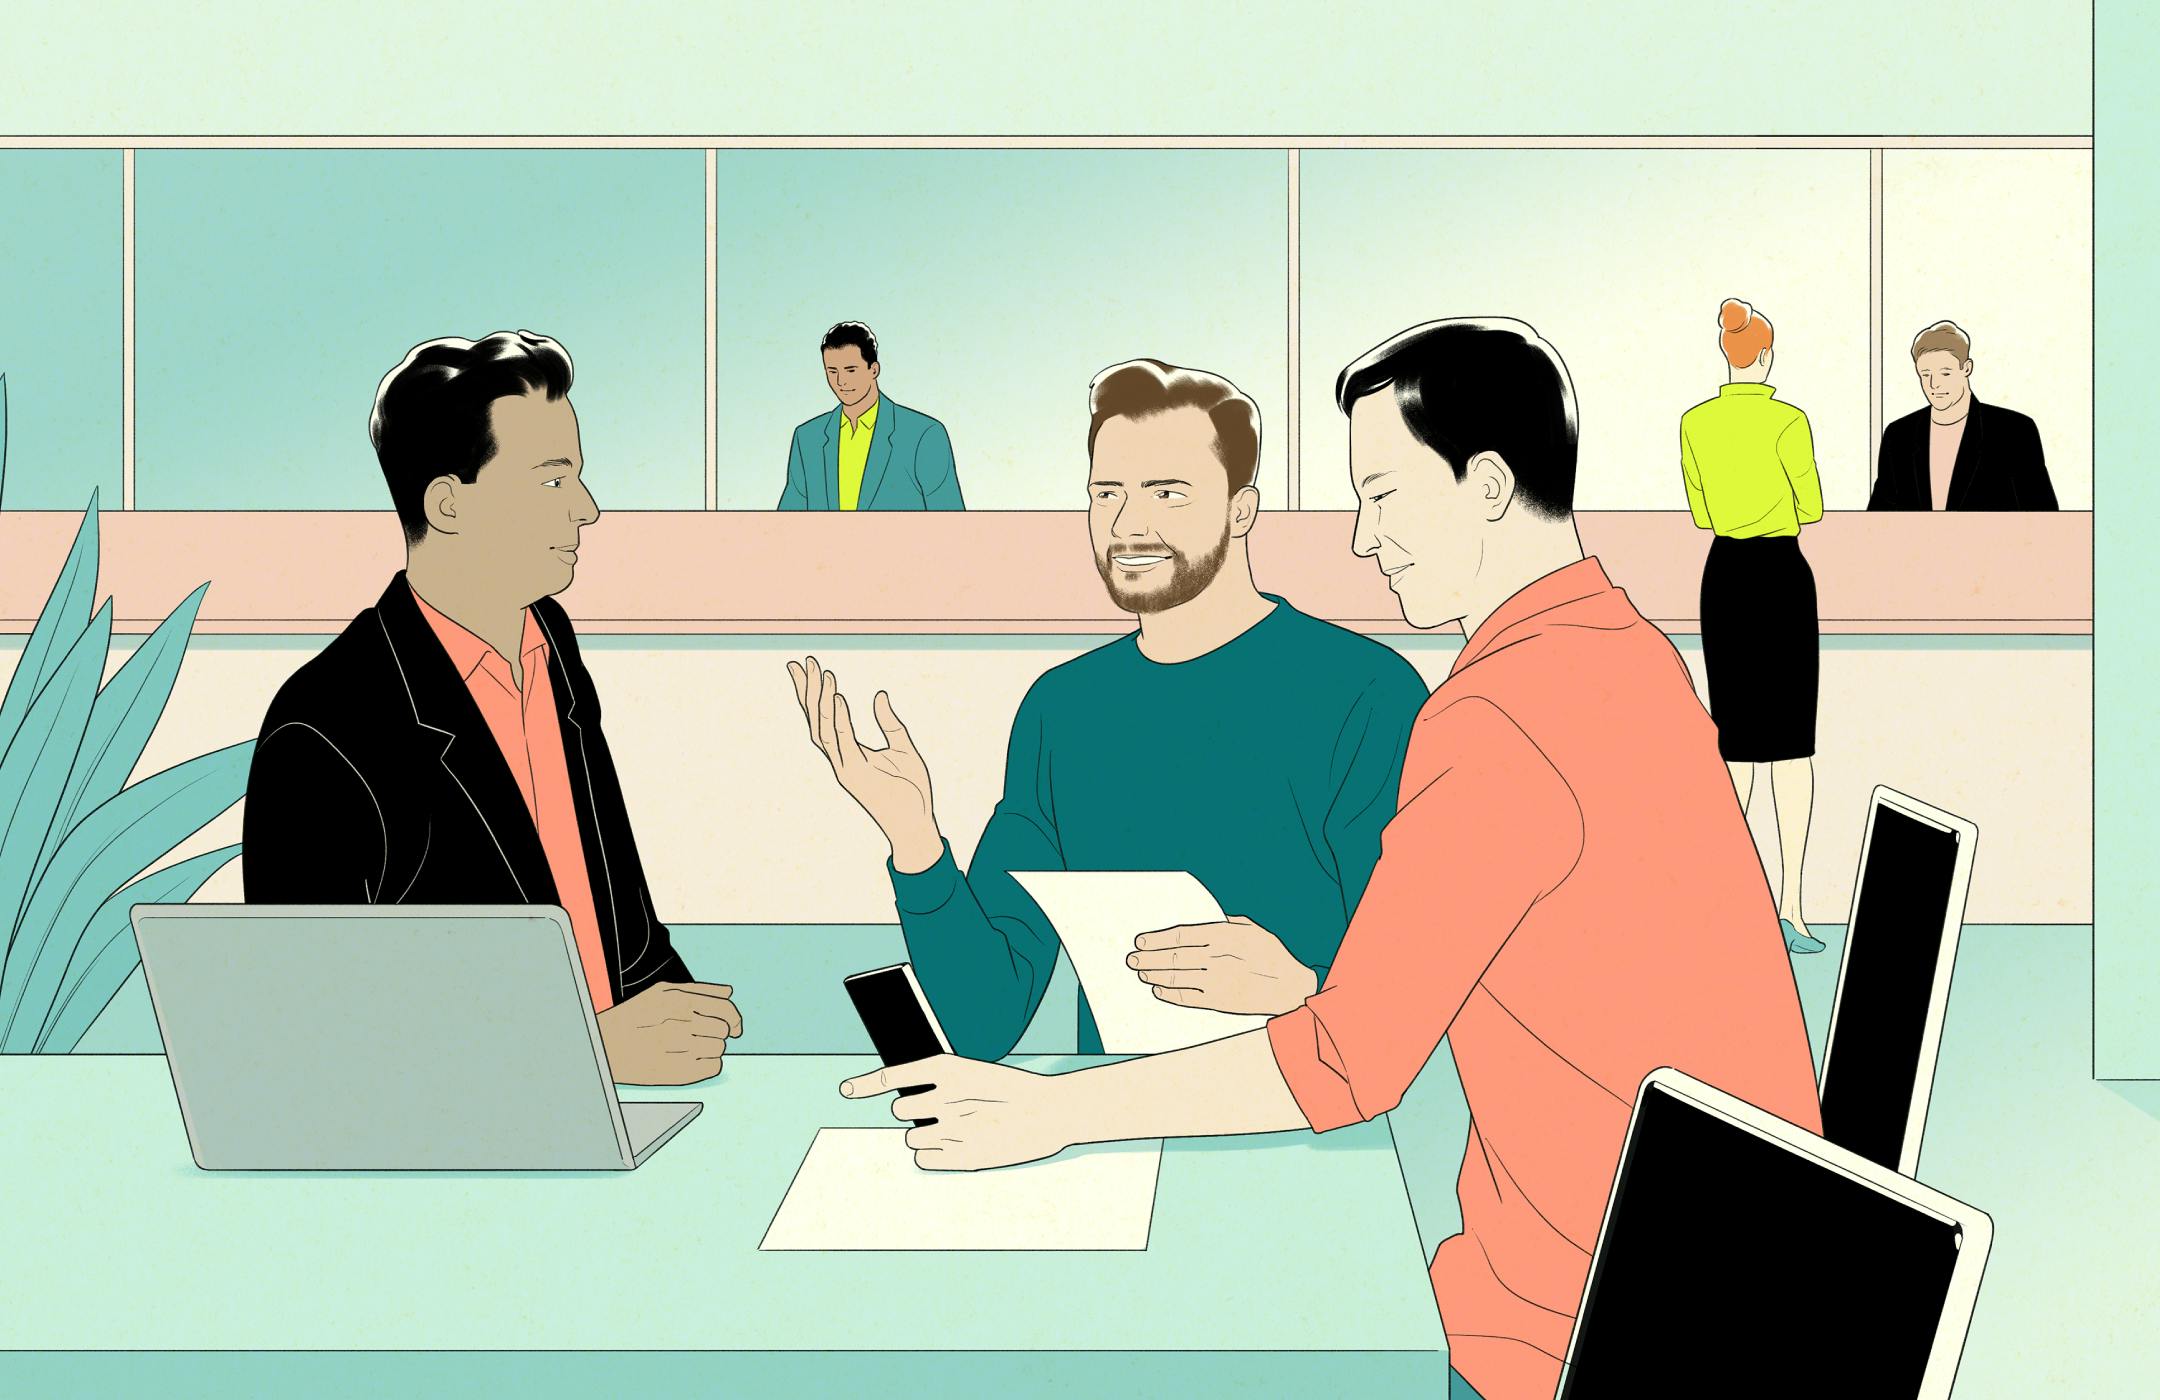 Illustration of three men collaborating in an office environment